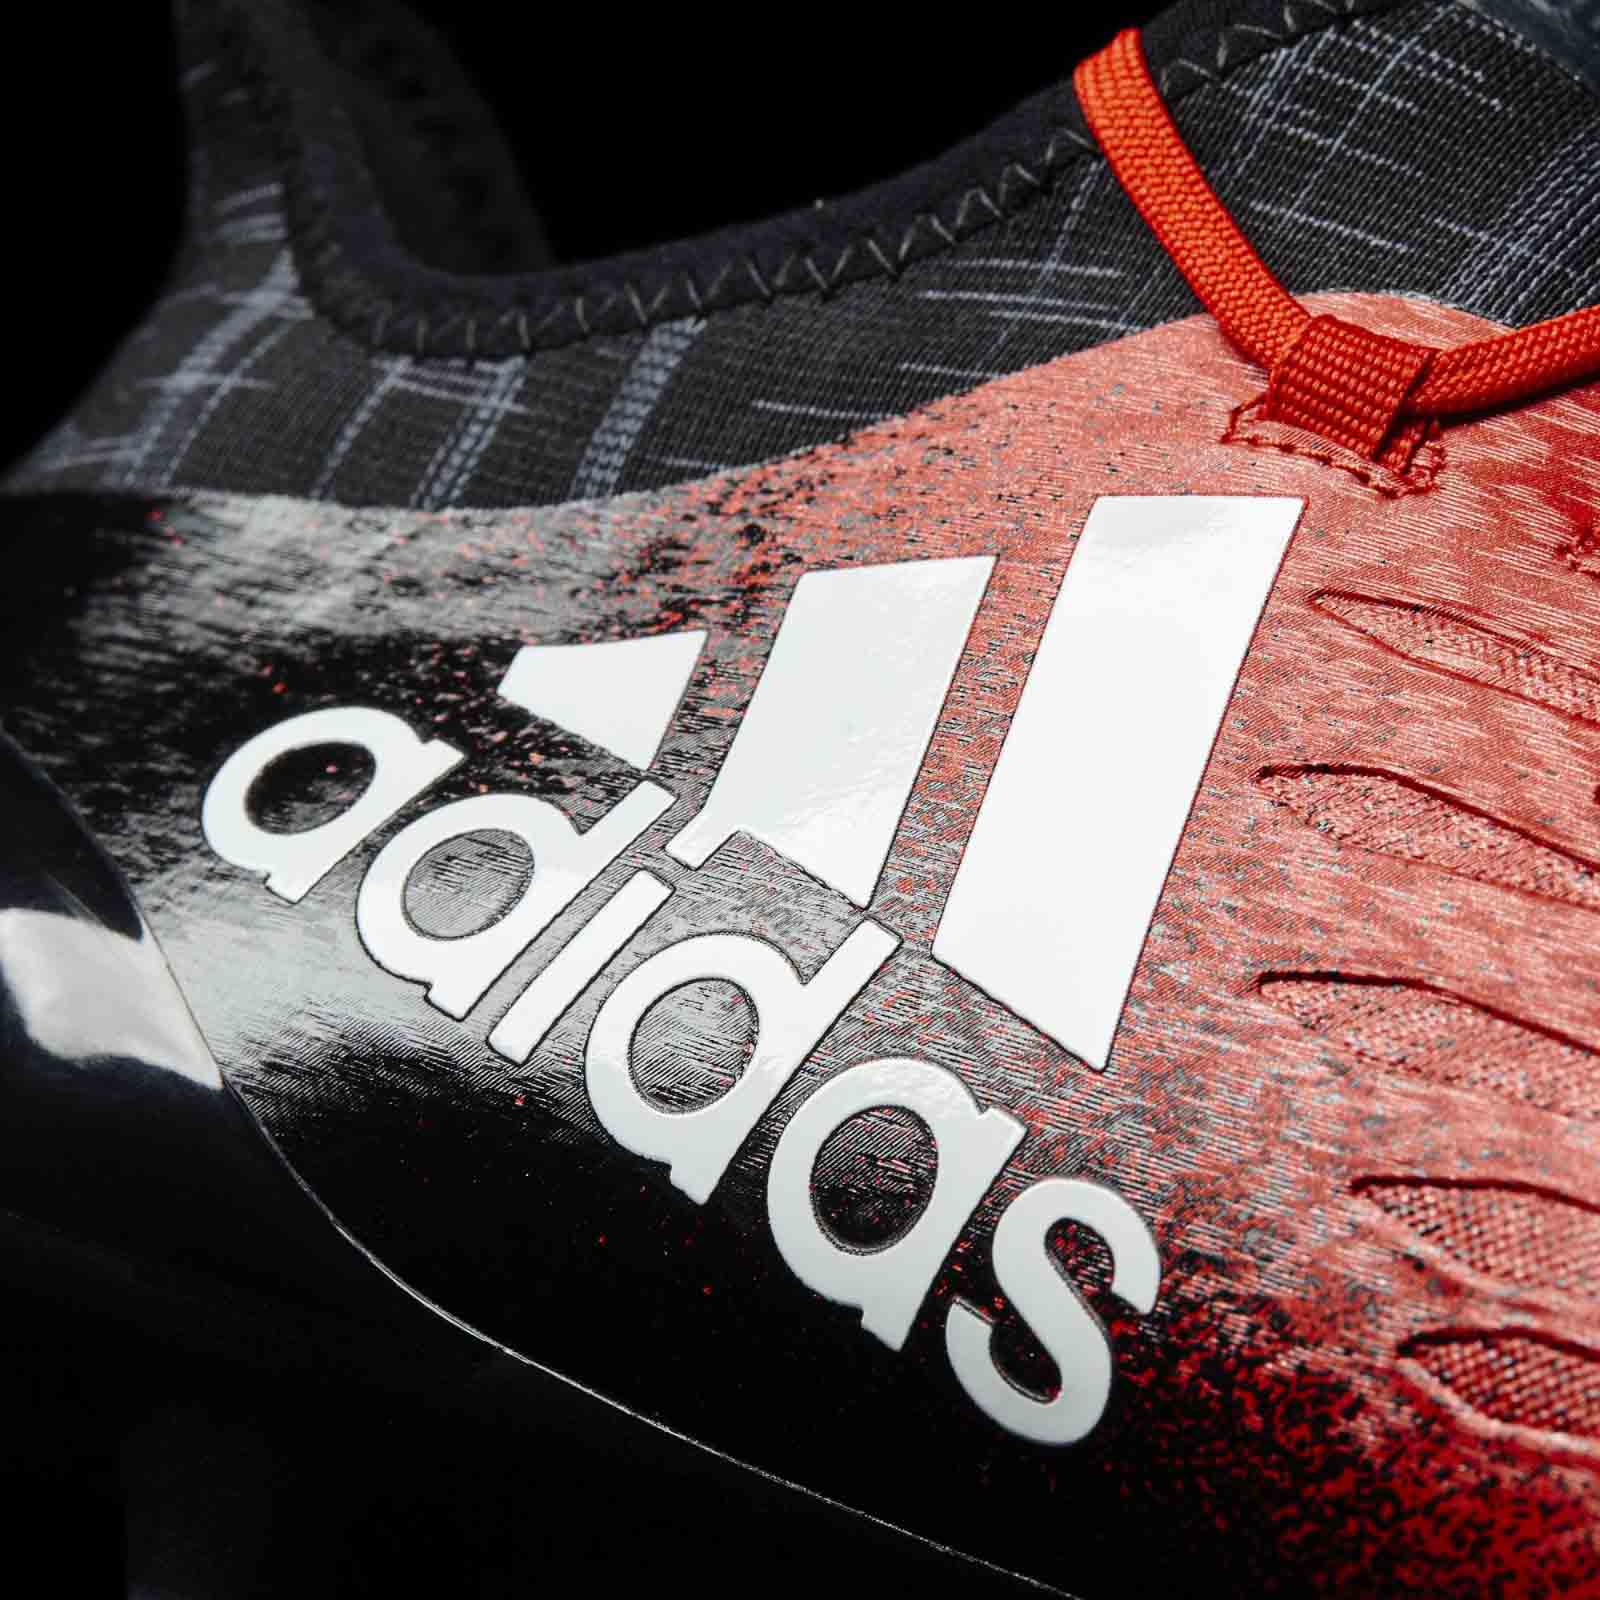 Adidas 16 Red Limit Boots Revealed - Footy Headlines